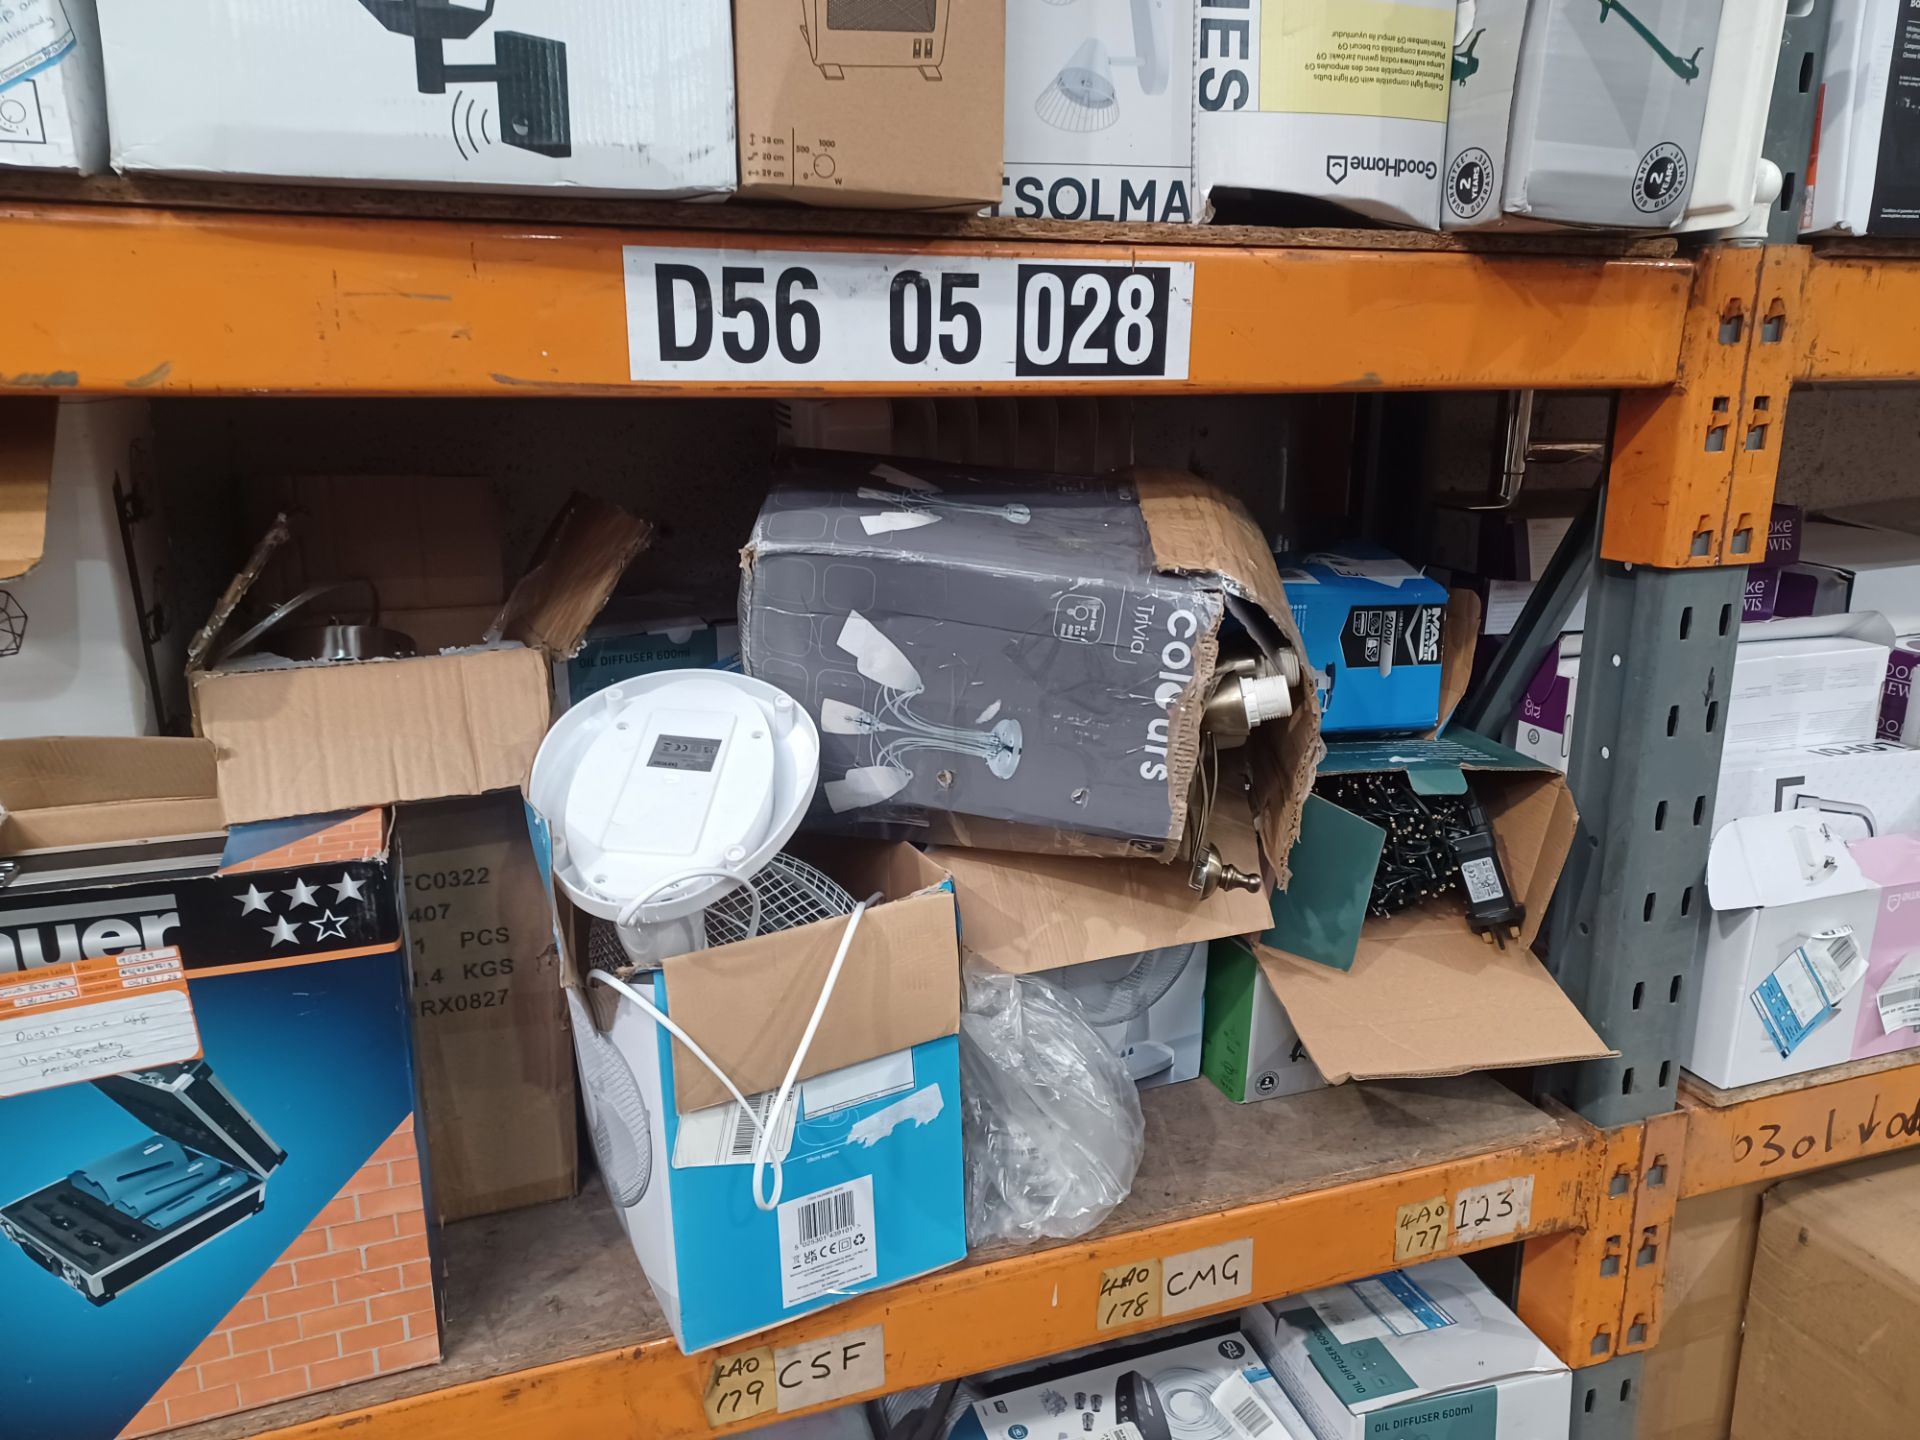 10 x Assorted Mixed Lot of Goods; may include, LED Lighting, Fans, Garden Lights, Power Tools, Drill - Image 3 of 3